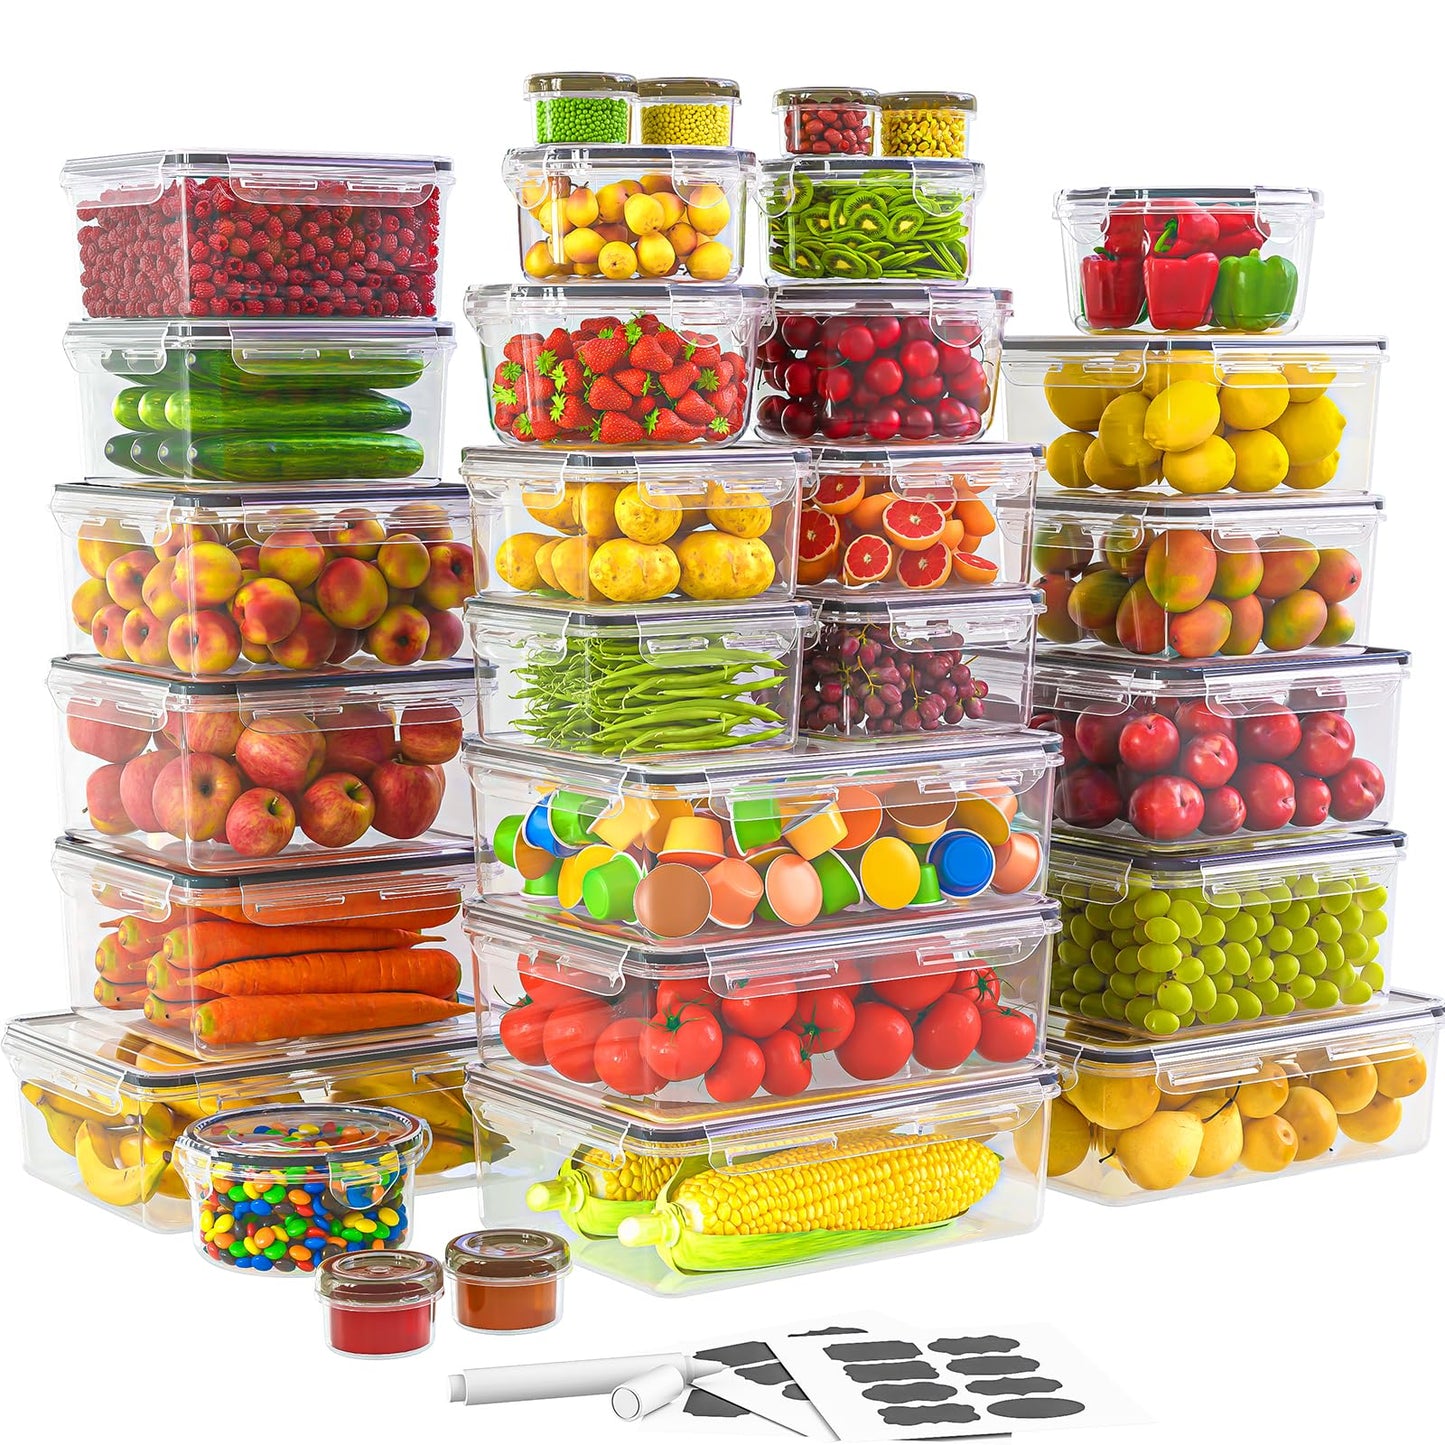 60 PCS Food Storage Containers with Lids(30 Containers & 30 Lids), Plastic Containers for Pantry & Kitchen Organization, Leak Proof, Stackable, Reusable Meal Prep Container with Labels & Pen